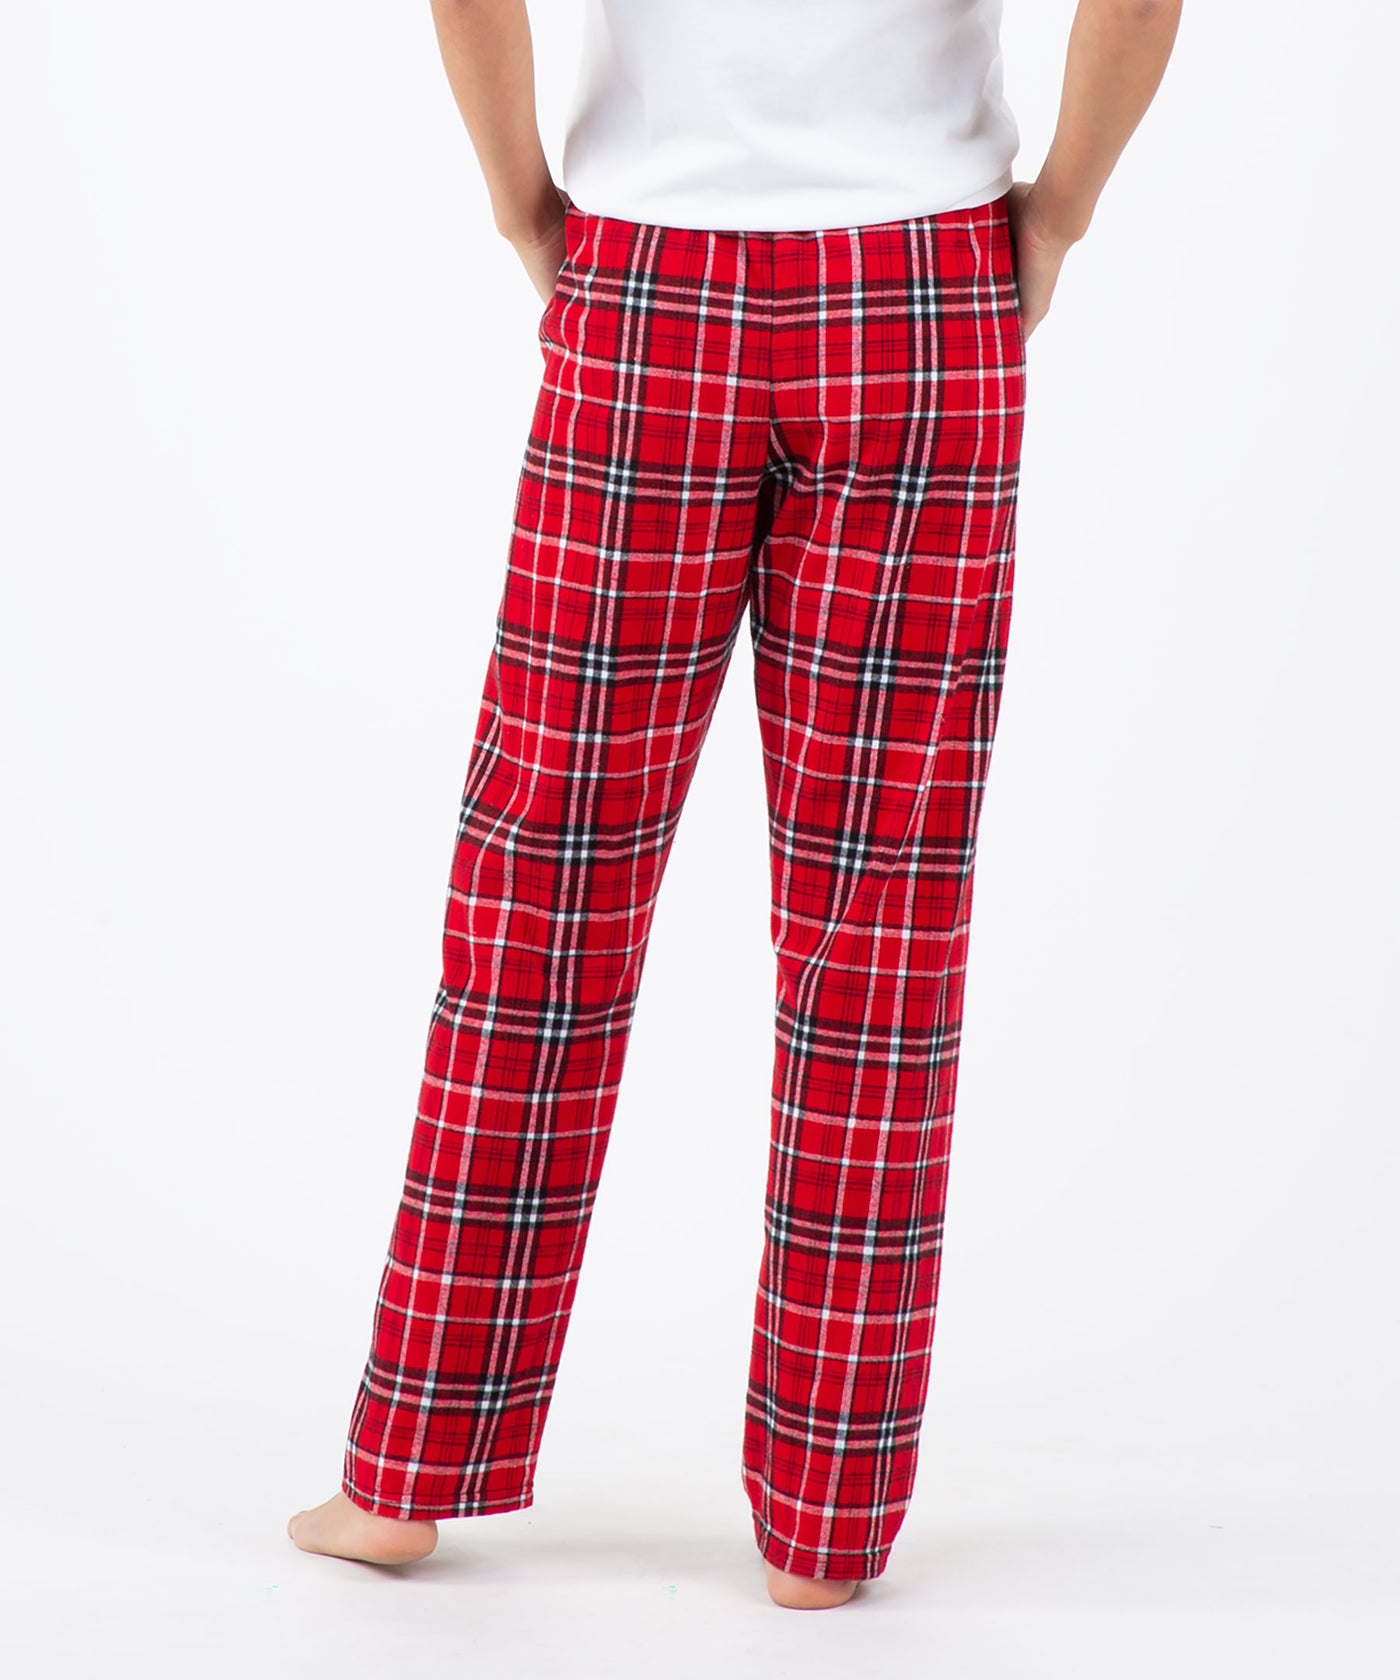 Boxercraft Women's Bucky Badger Flannel Pants (Red Check)